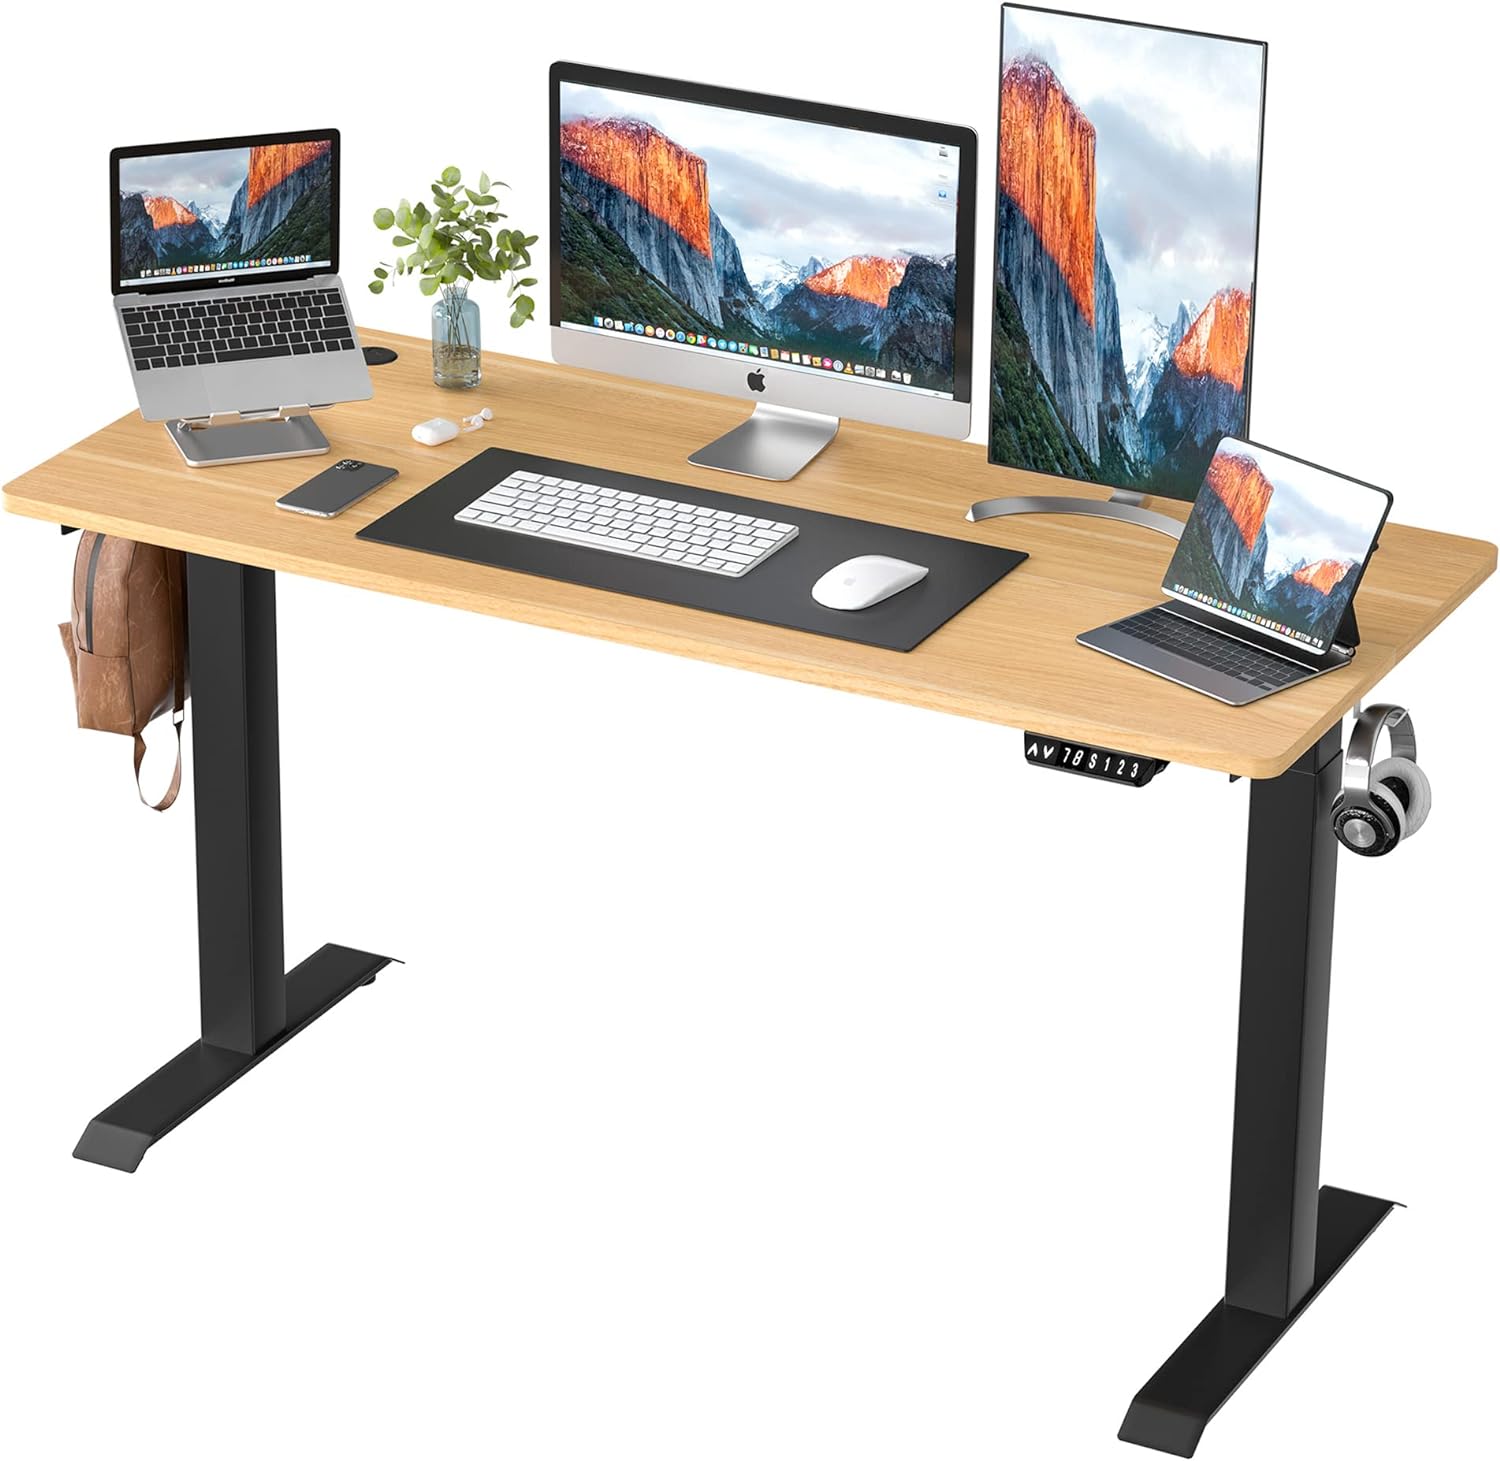 Easy to assemble, very clear instructions and easy to follow, just youll someone to help you to flip it over because its very heavy. Overall, I love my desk